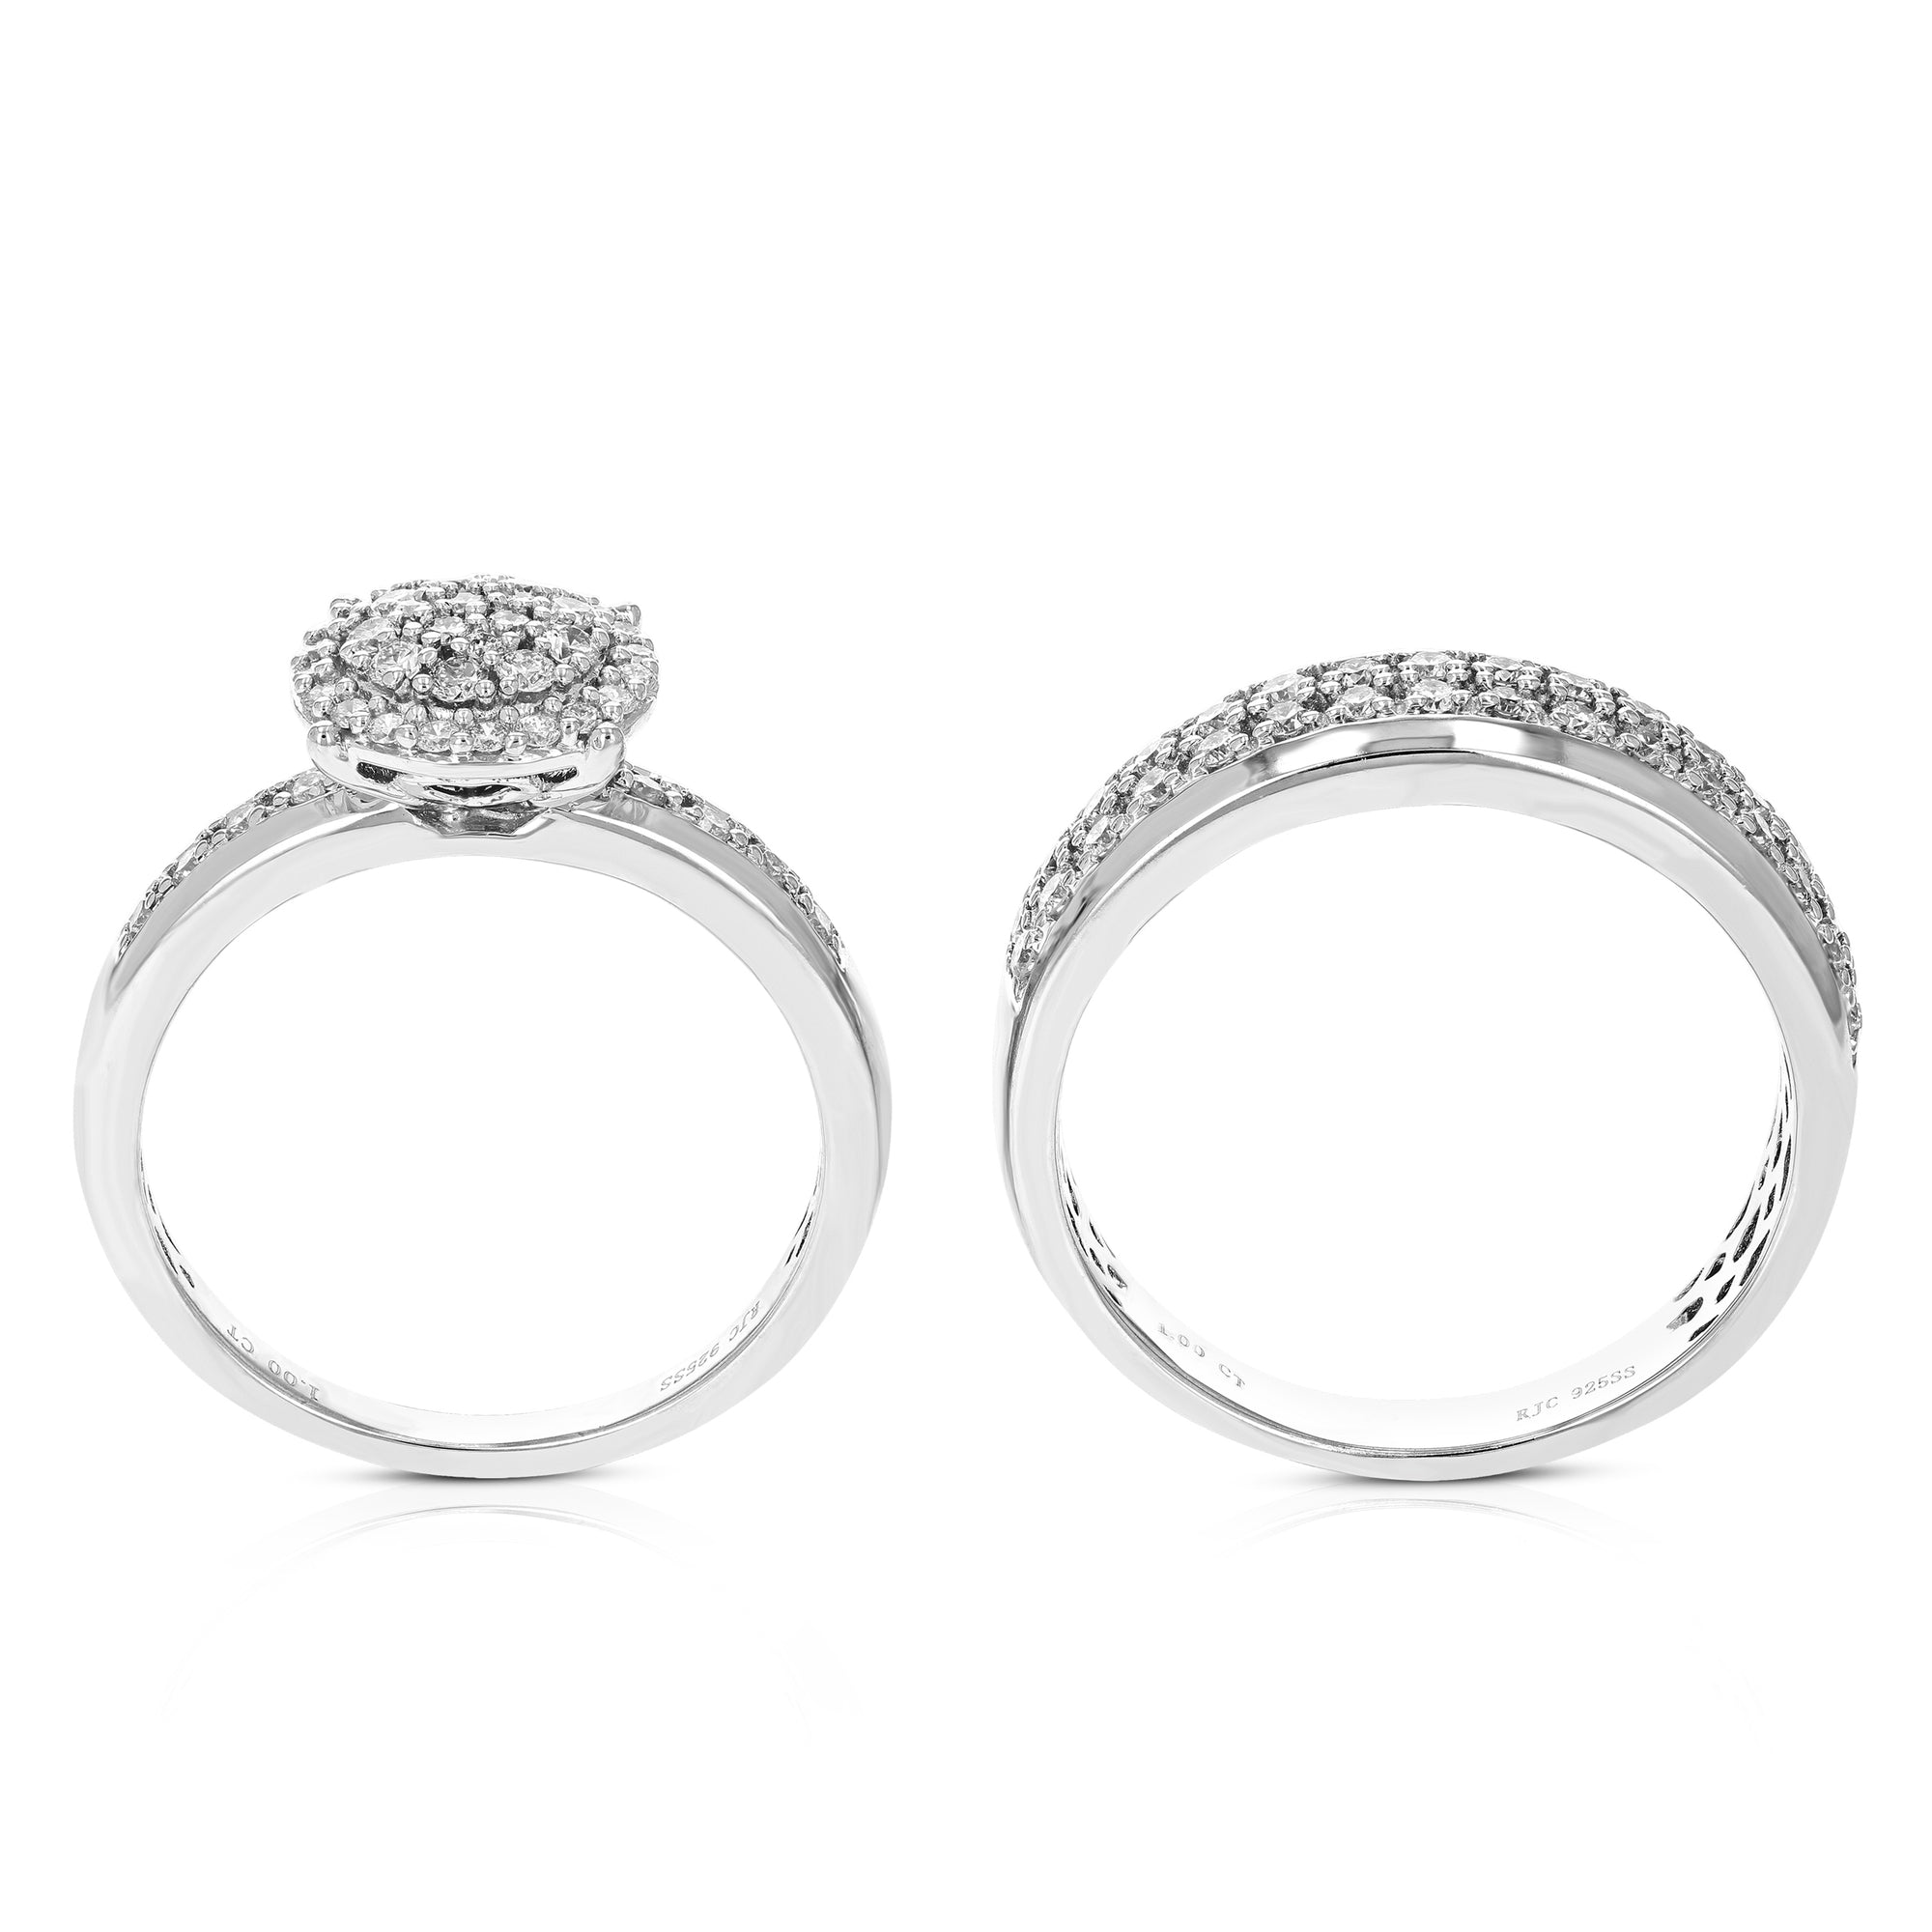 1 cttw Diamond Engagement Ring for Him and Her, Round Lab Grown Diamond Ring in 0.925 Sterling Silver, Prong Setting, Size 6-8